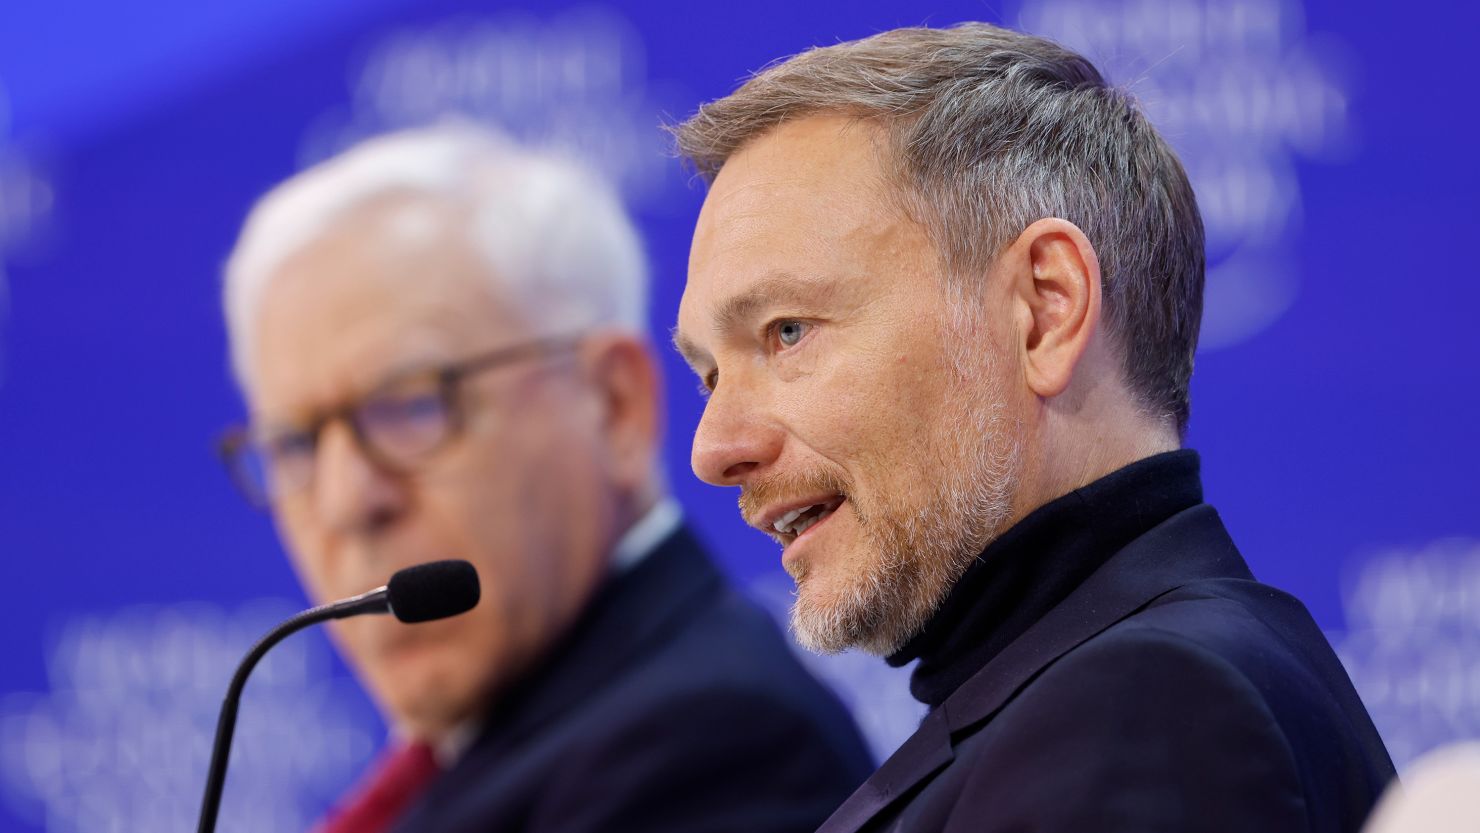 Christian Lindner, Germany's finance minister, during a panel session on the closing day of the World Economic Forum (WEF) in Davos, Switzerland, on Friday, Jan. 19, 2024. The annual Davos gathering of political leaders, top executives and celebrities runs from January 15 to 19.